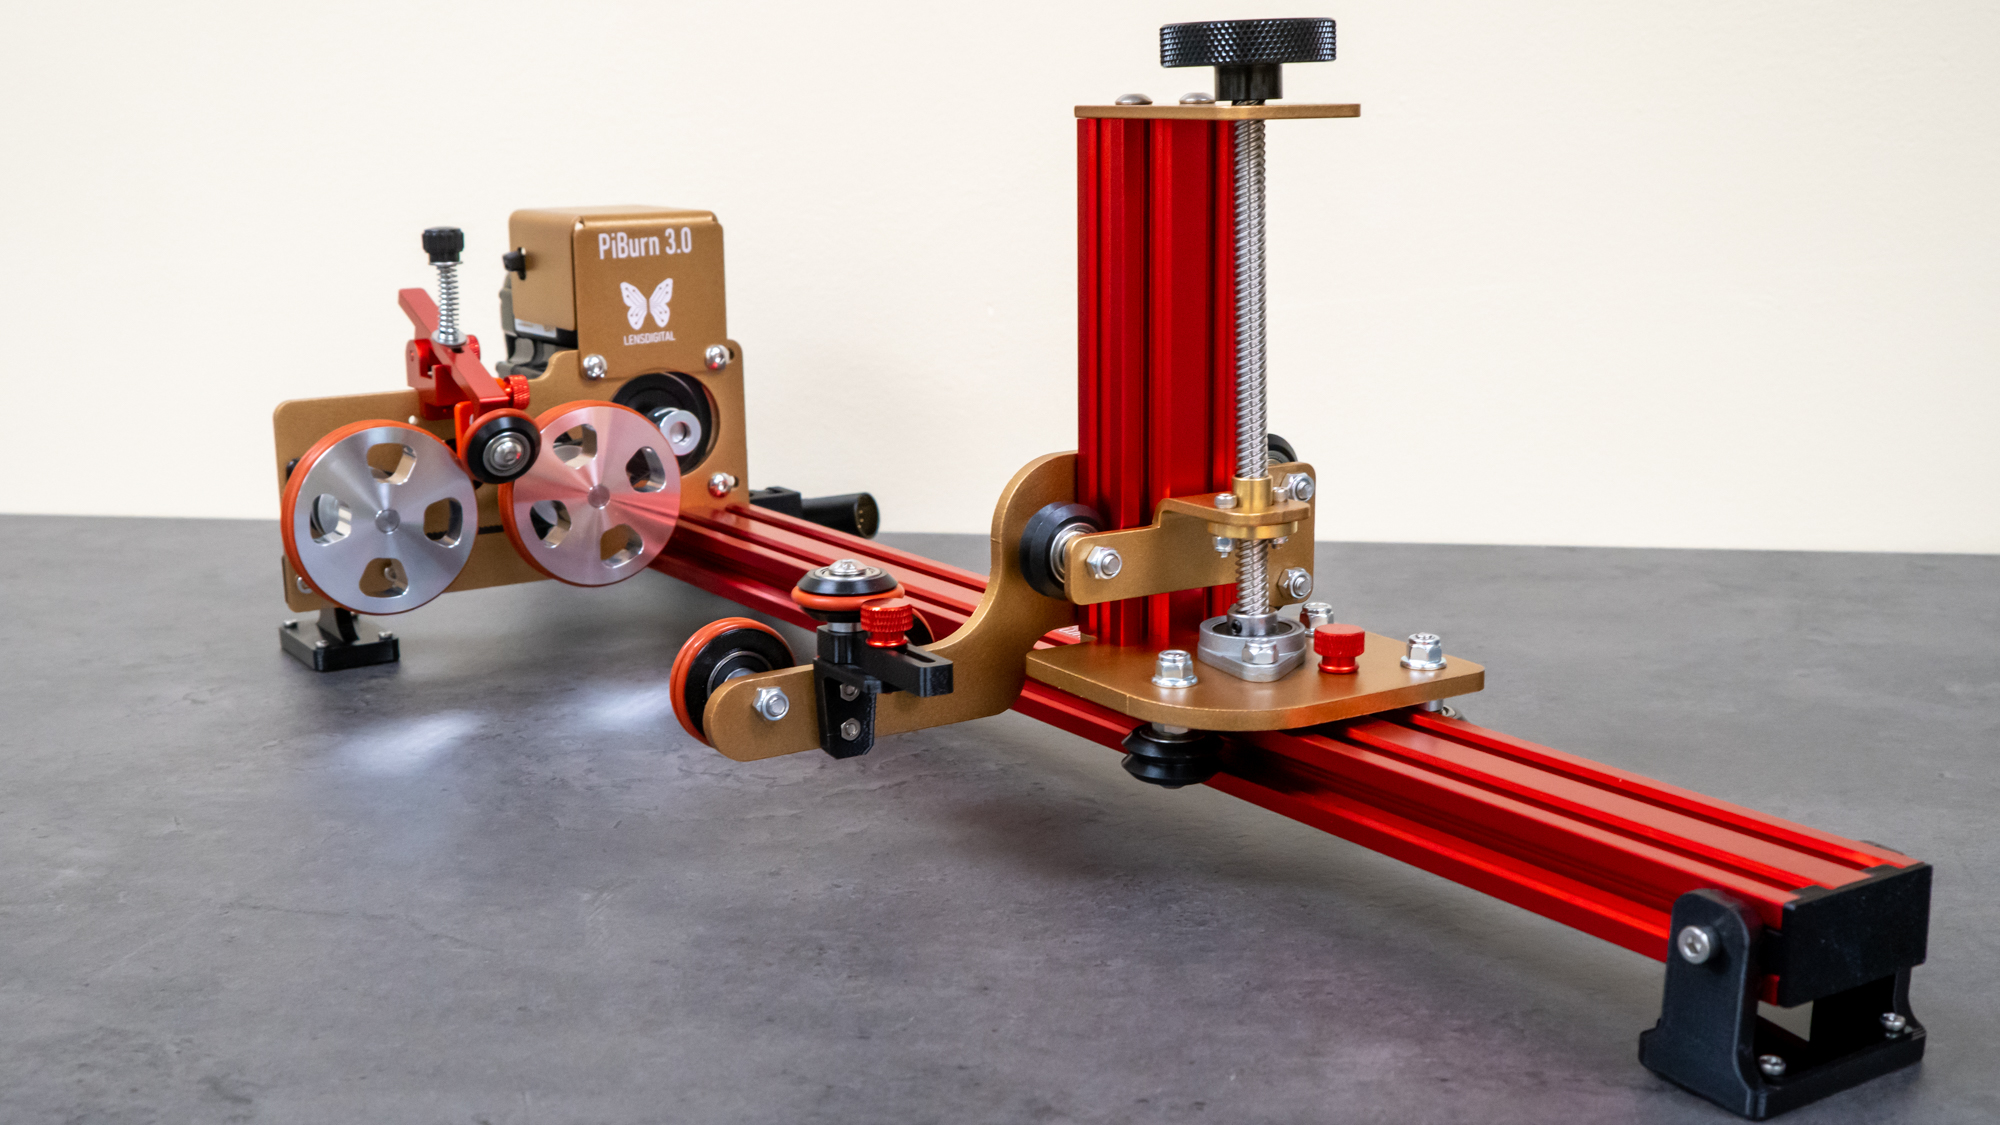 PiBurn laser engraver rotary attachment - Geeky Gadgets